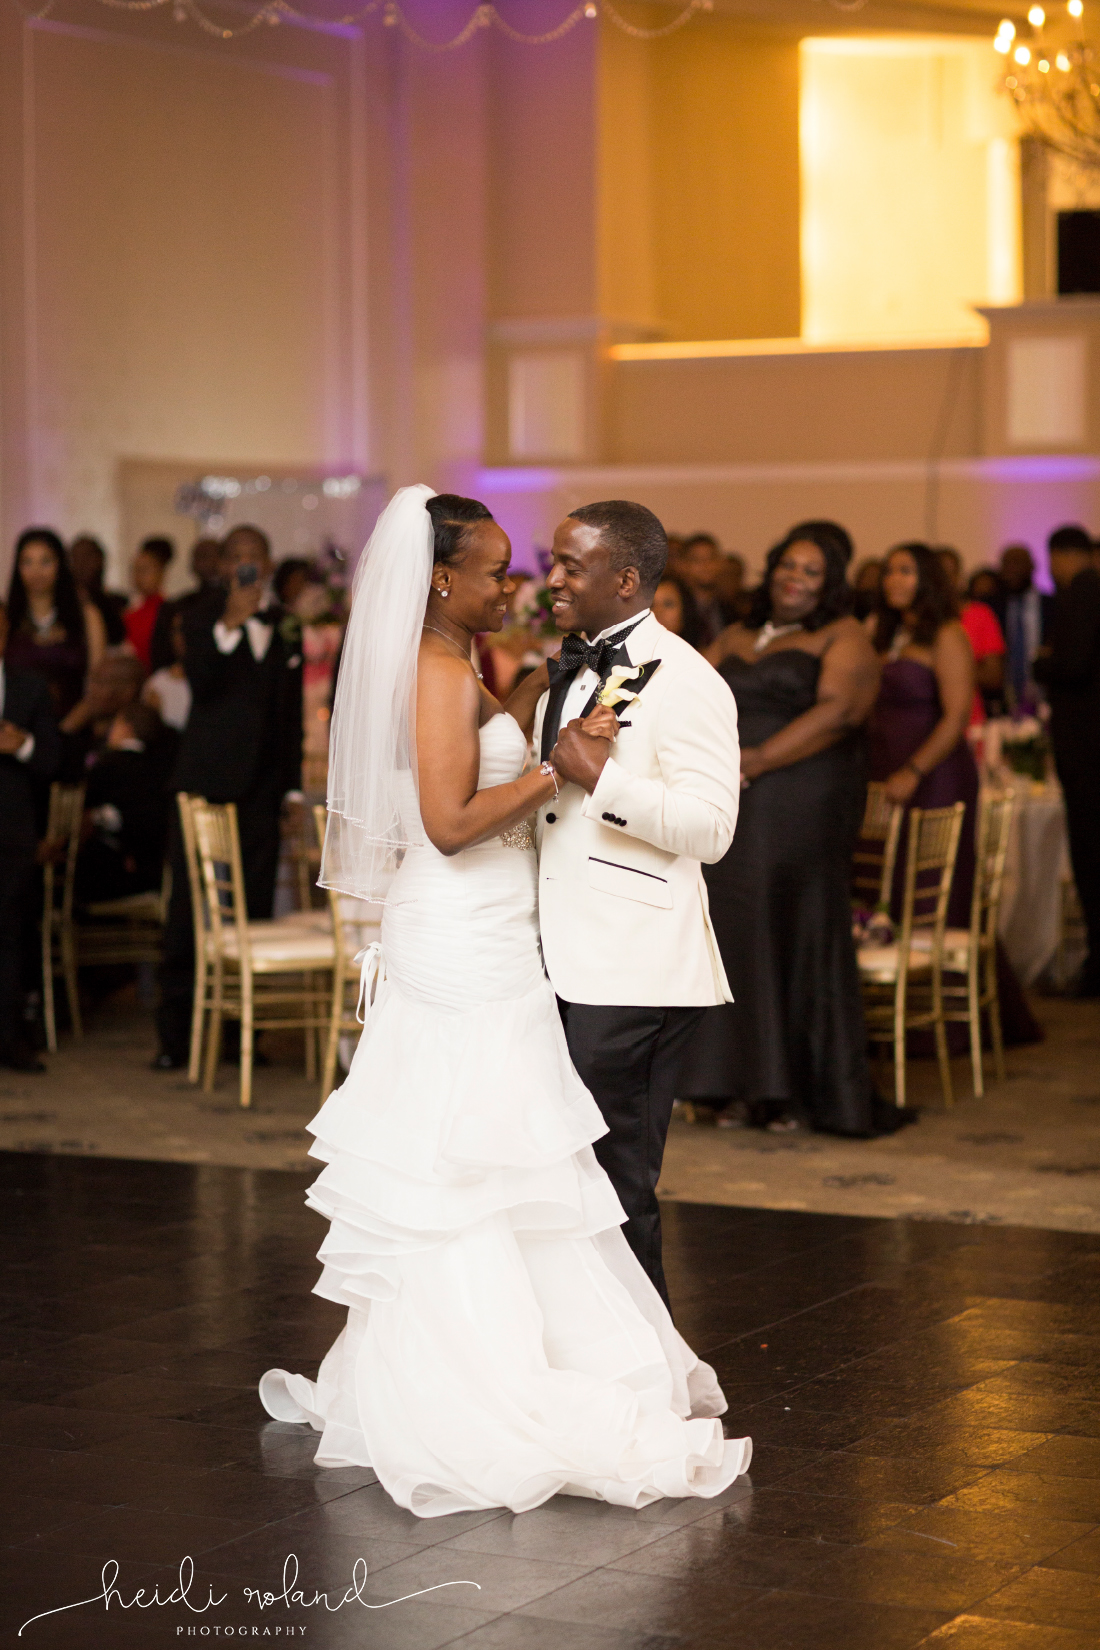  bride and groom first dance in regal ballroom